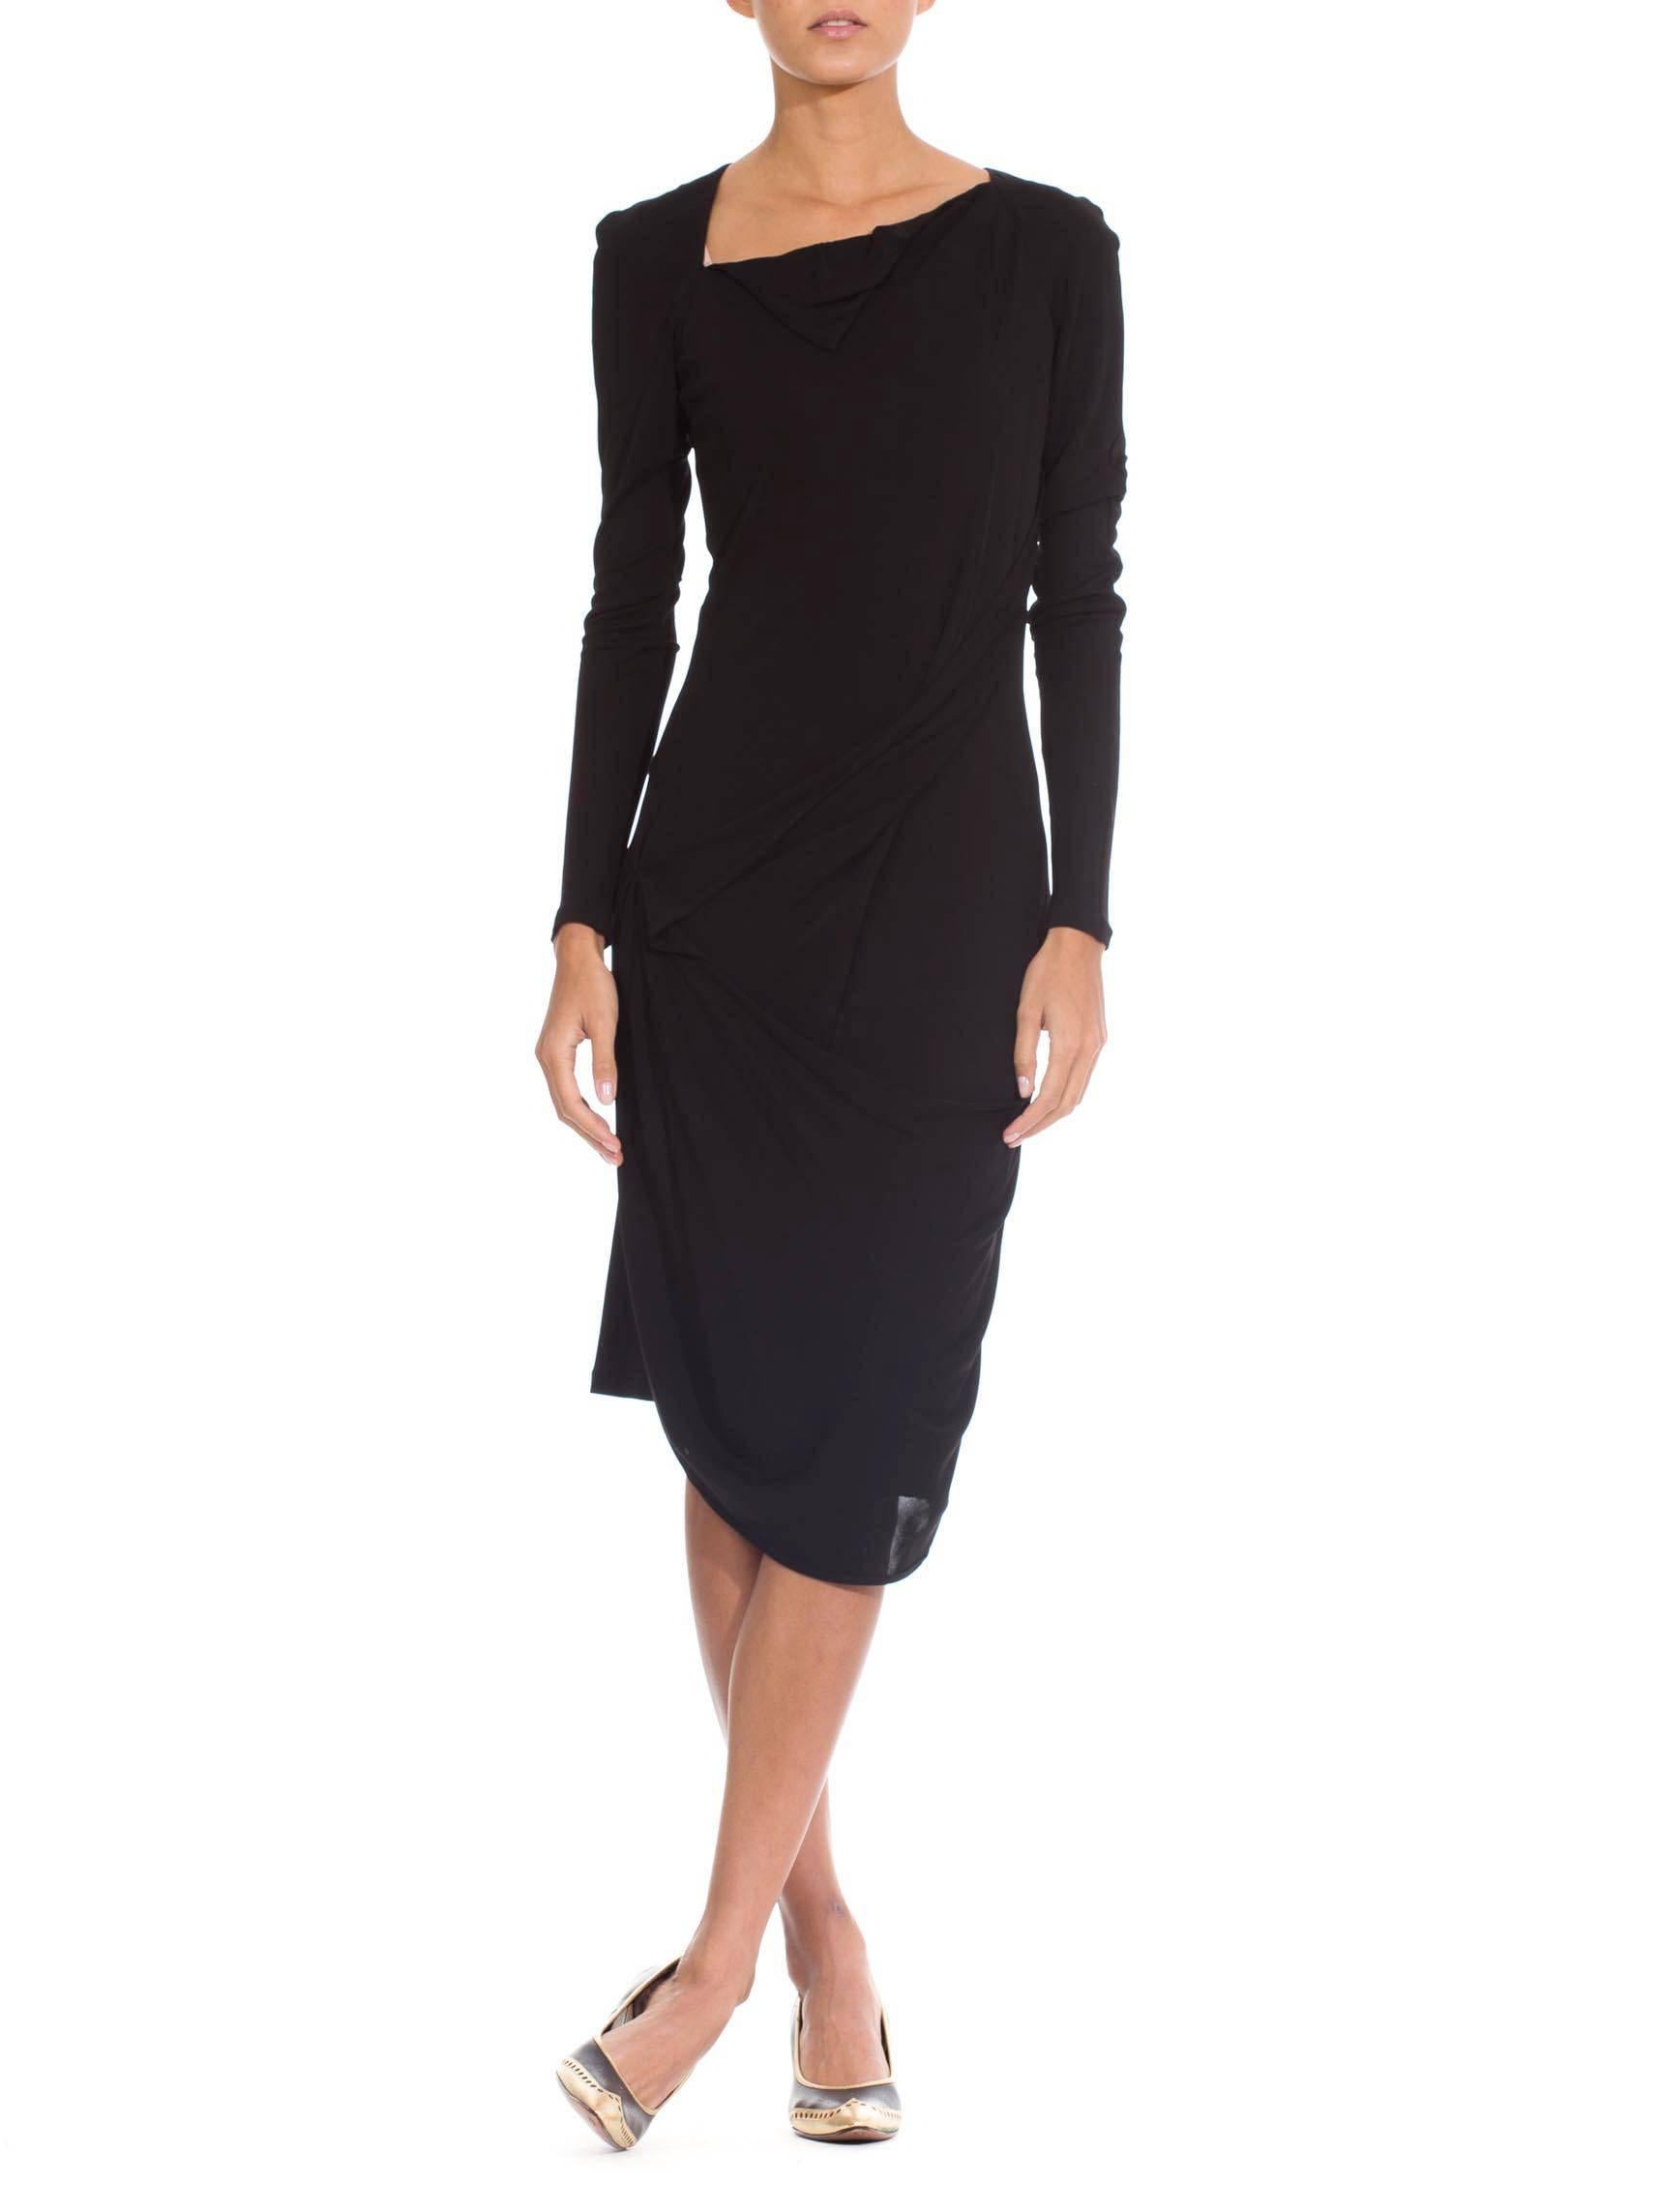 This is a beautiful Little Black Dress from the house of Martin Margiela. Classic and simple, it is made elegant by the delicate draping of fabric diagonally across the body. The folds run from the upper ribs across to the hip, and from there sweep